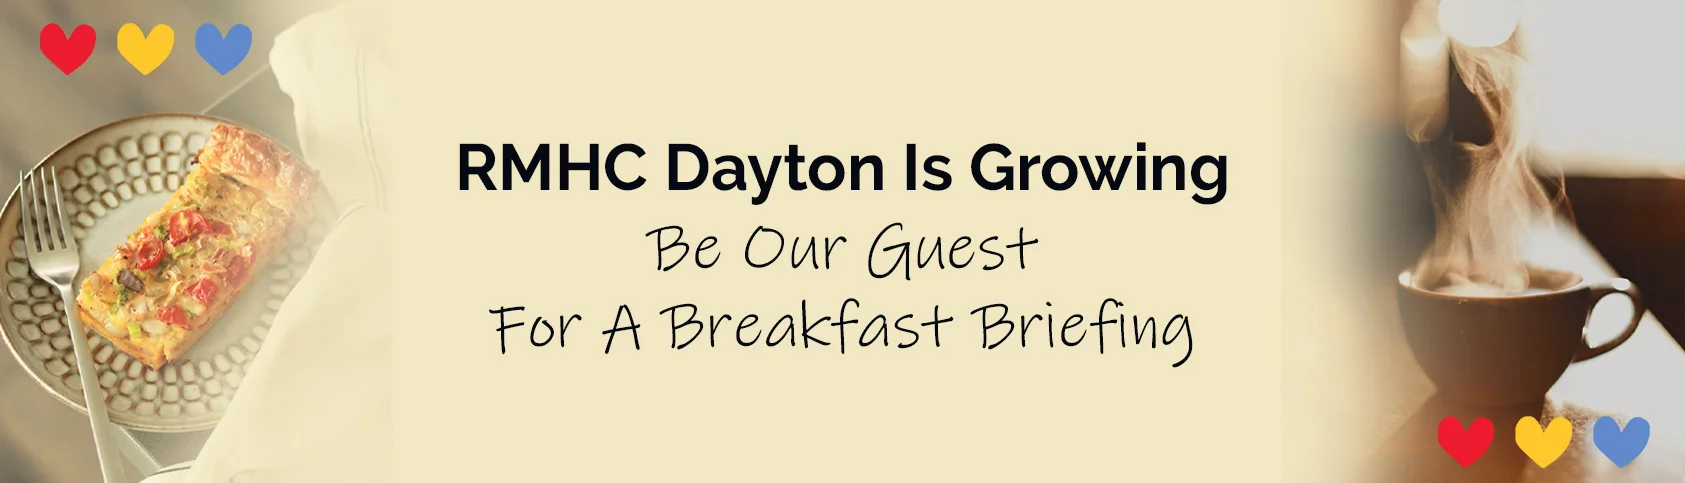 RMHC Dayton is growing be our guest for a breakfast briefing